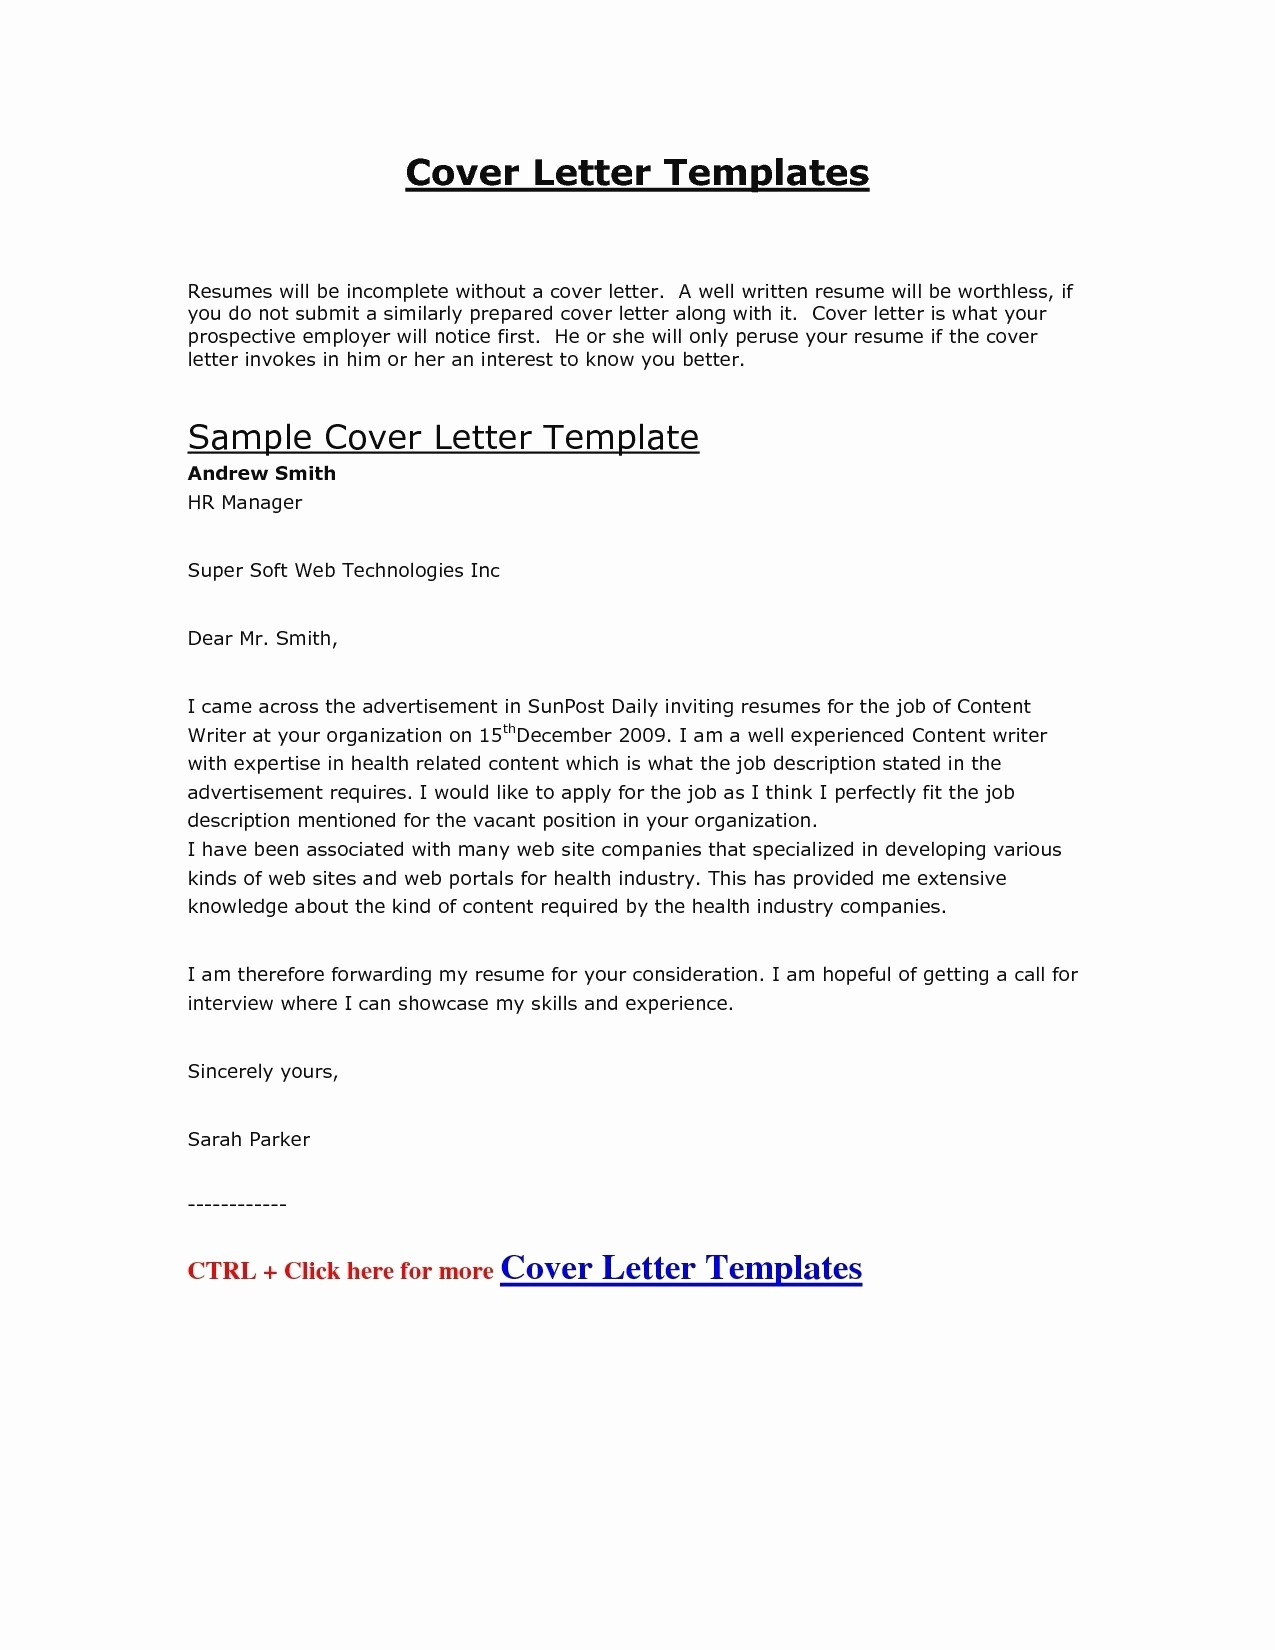 Cover Letter Template No Experience - Job Application Letter format Template Copy Cover Letter Template Hr